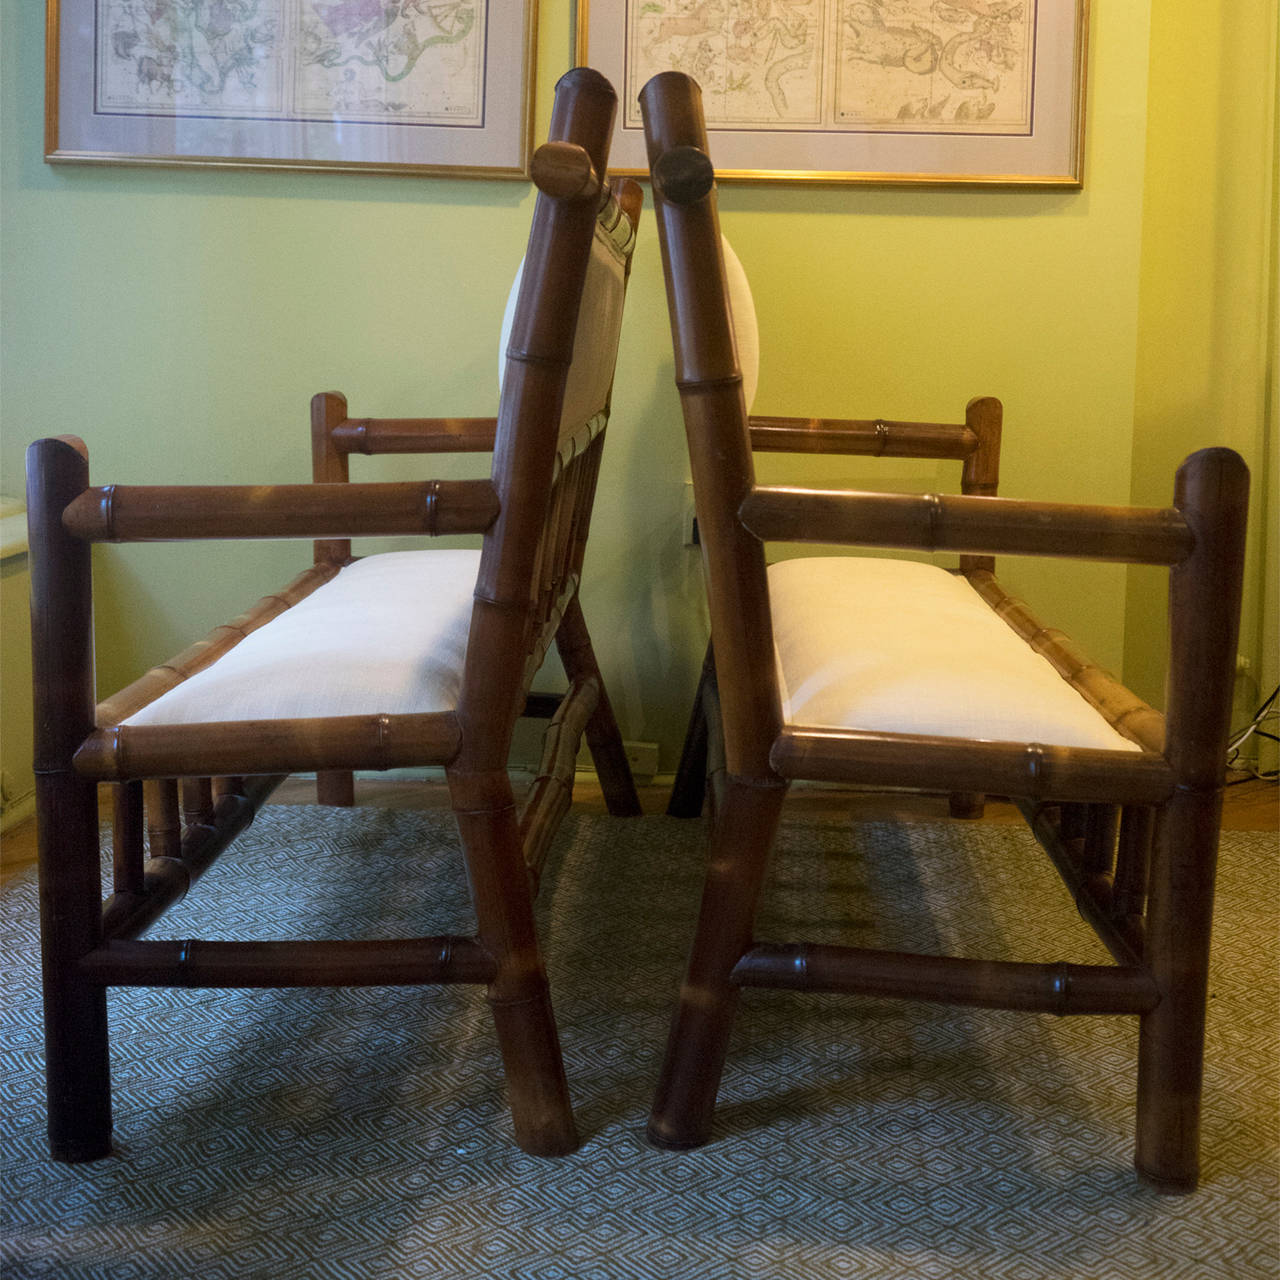 Pair of 19th century bamboo benches, likely Perret et Vibert. Thick bamboo frame with vertical slat accents.